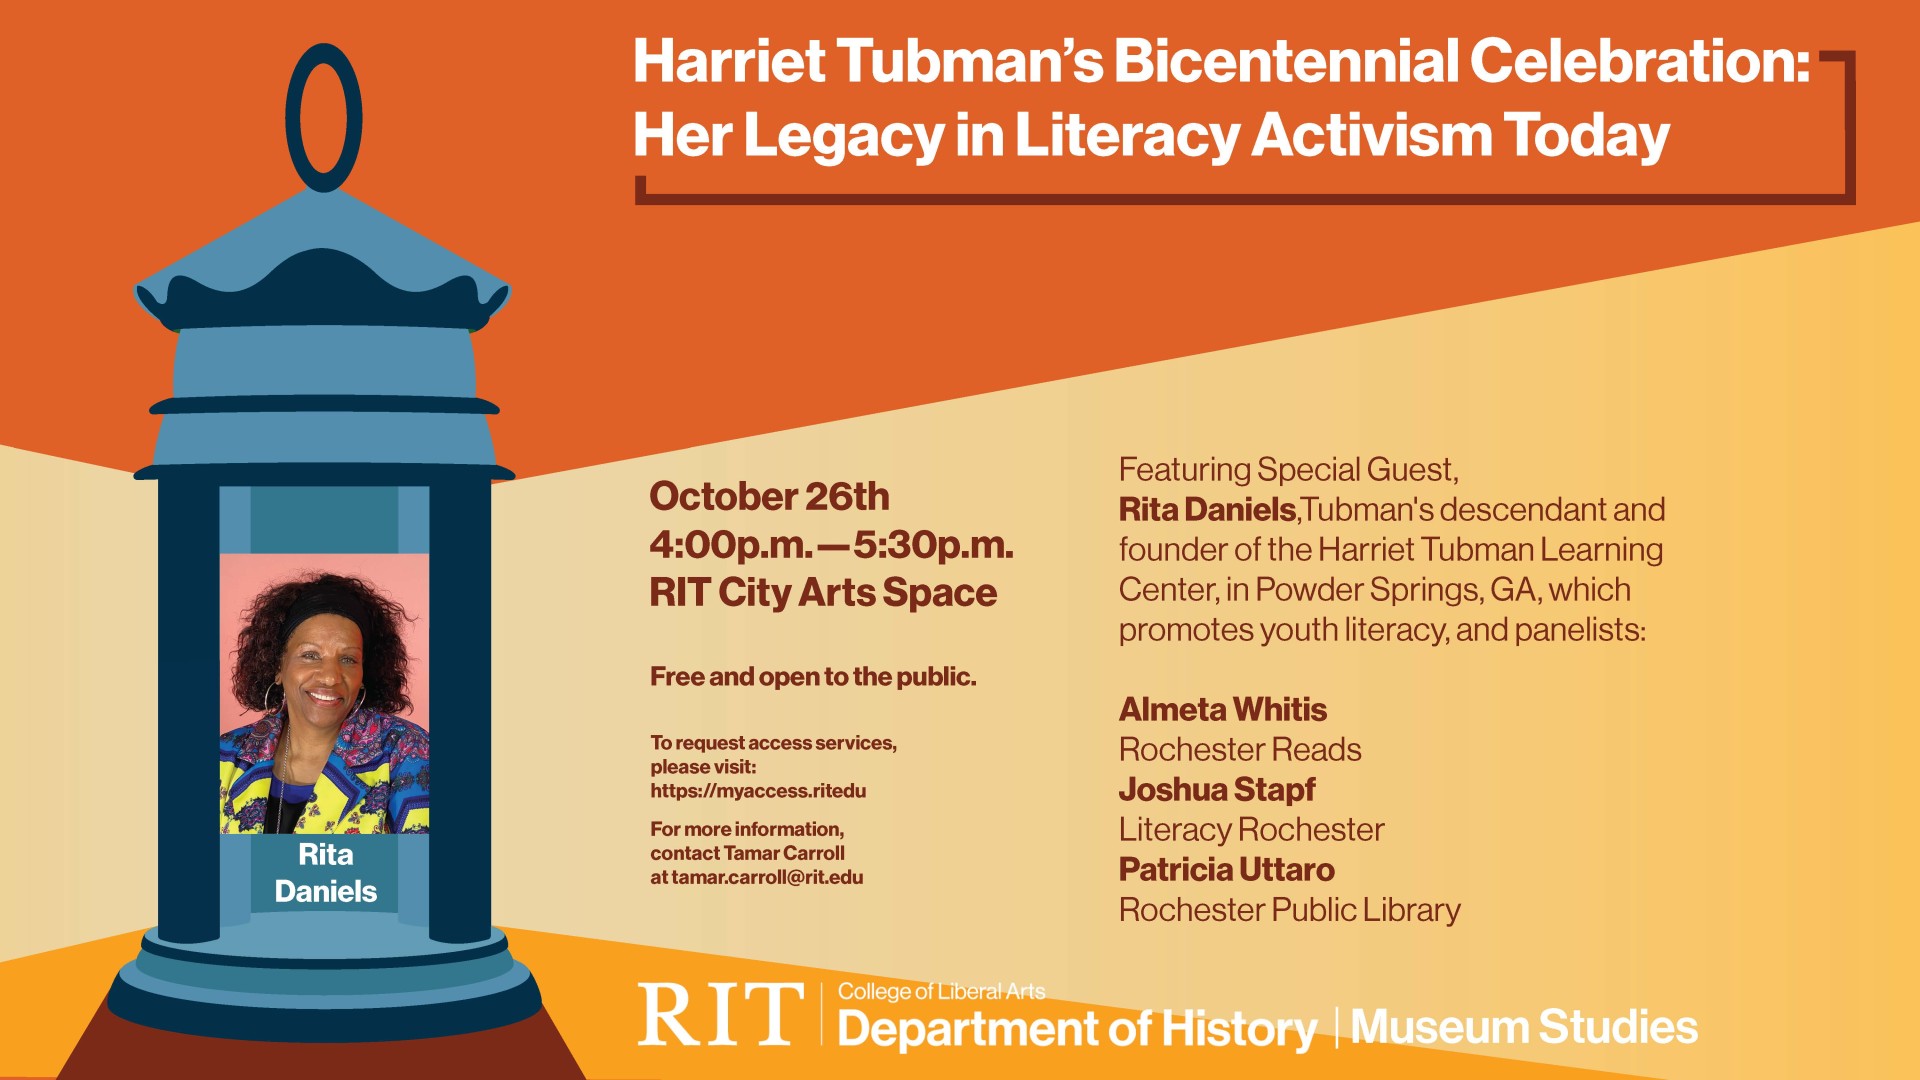 Image of Rita Daniels and text regarding Harriet Tubman's Bicentennial Celebration: Her Legacy in Literacy Activism Today